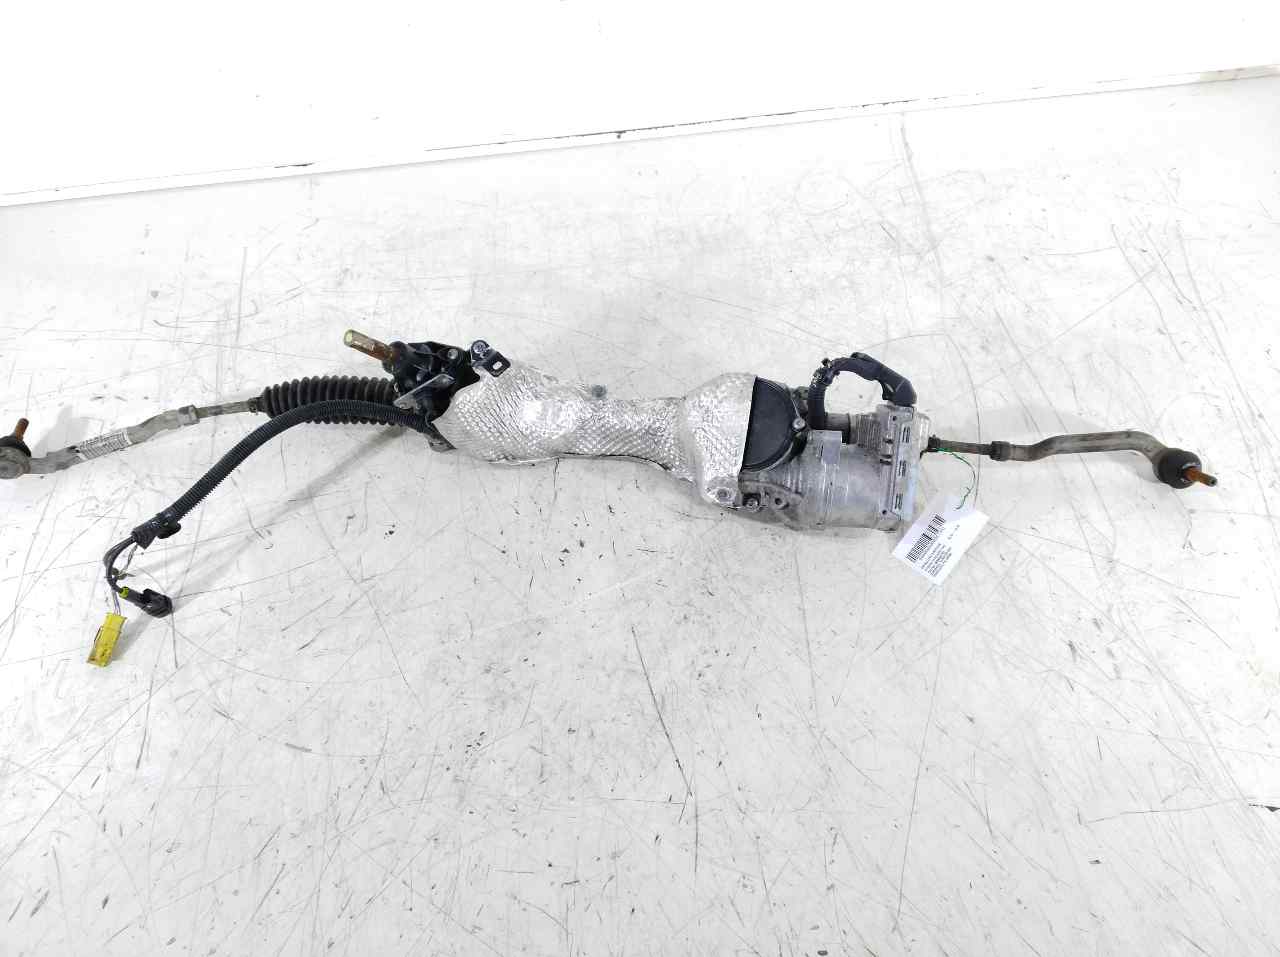 CITROËN C4 Picasso 2 generation (2013-2018) Steering Rack 6820000276A, 6820000276A, 6820000276A 24513478